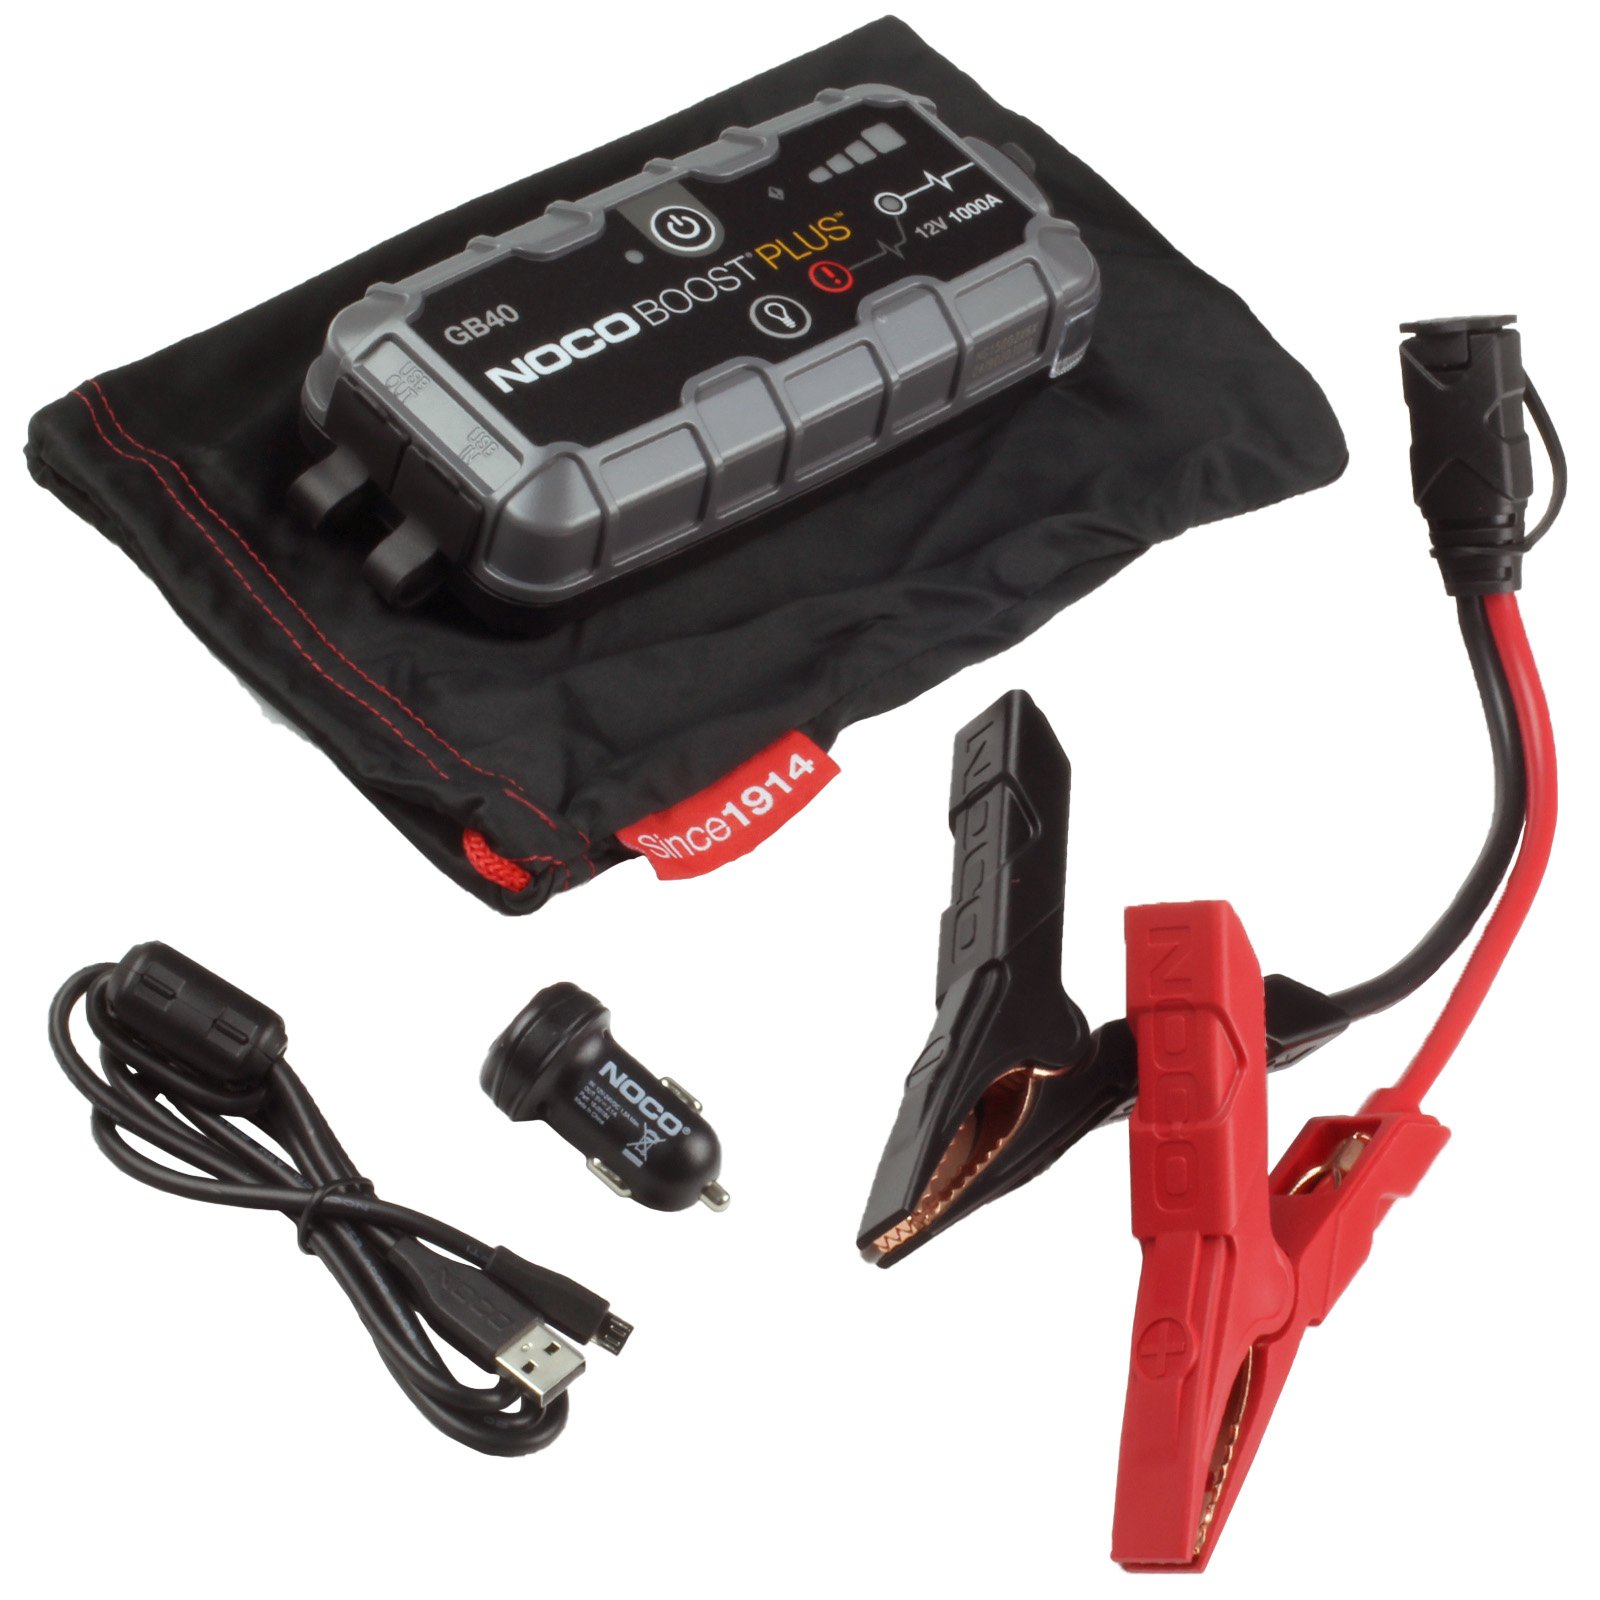 NOCO Plus GB40 1000A Lithium Jump Starter Powerbank - Motorcycle Parts Store